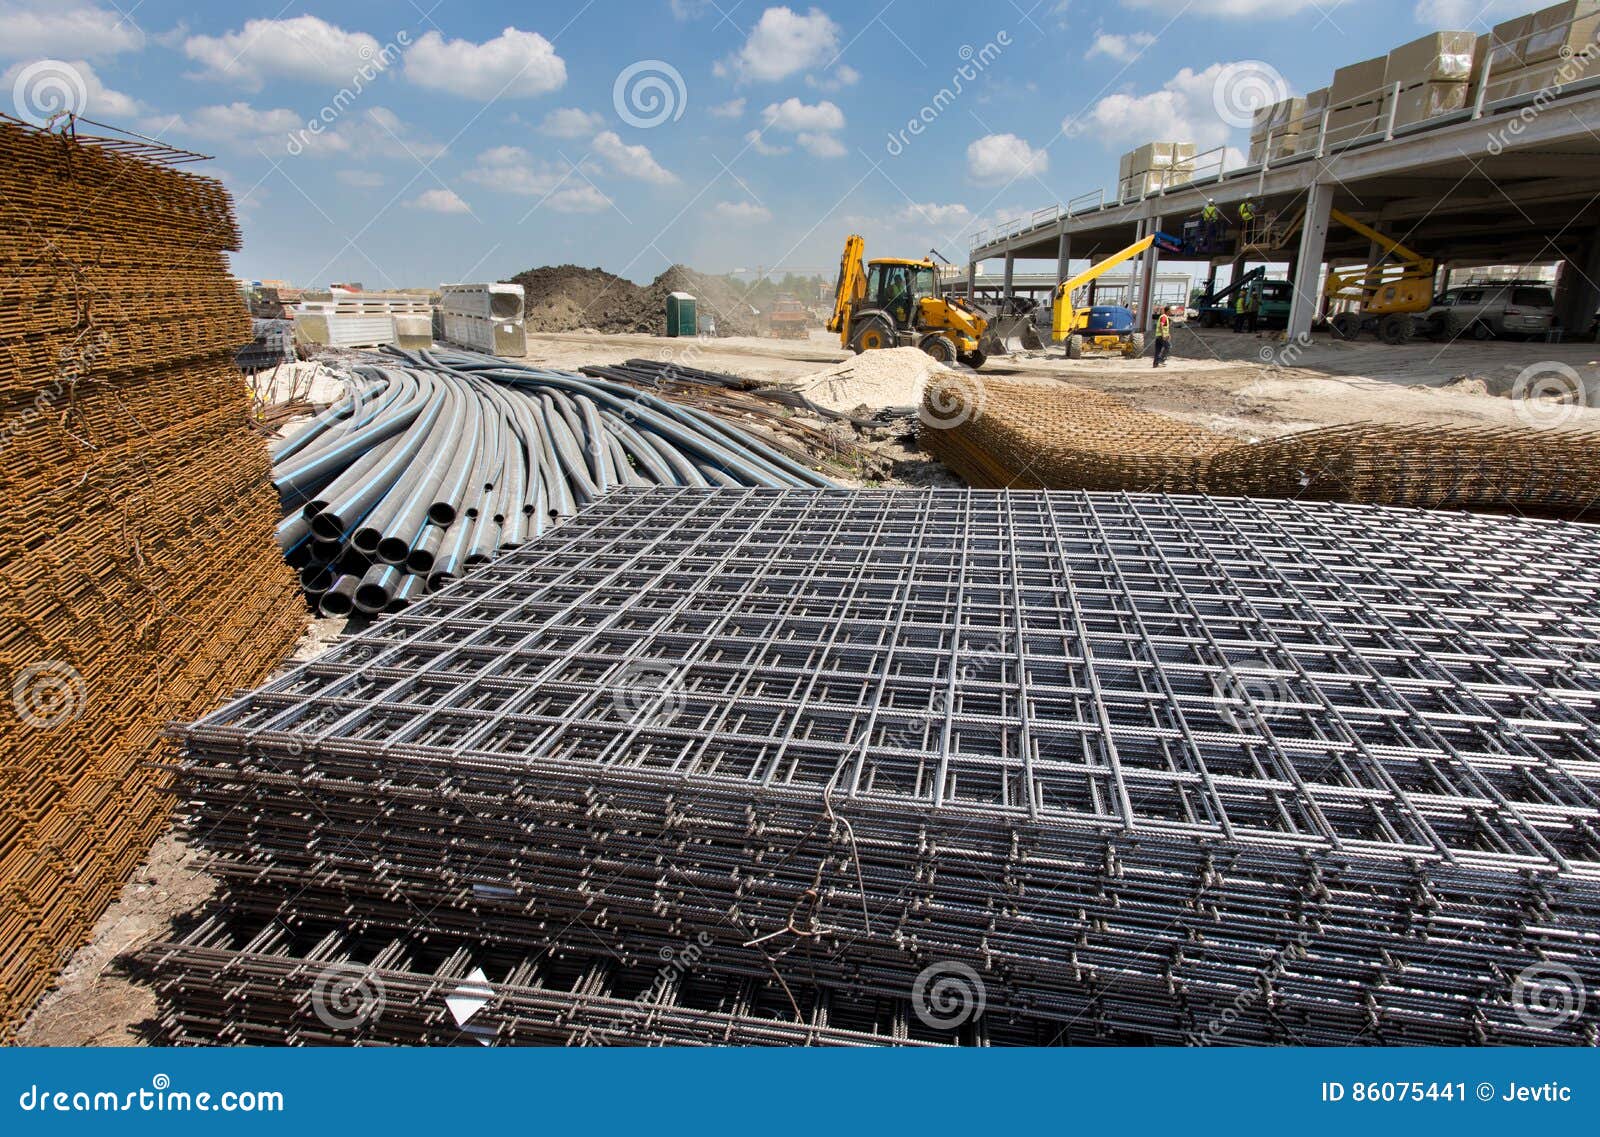 construction material at building site